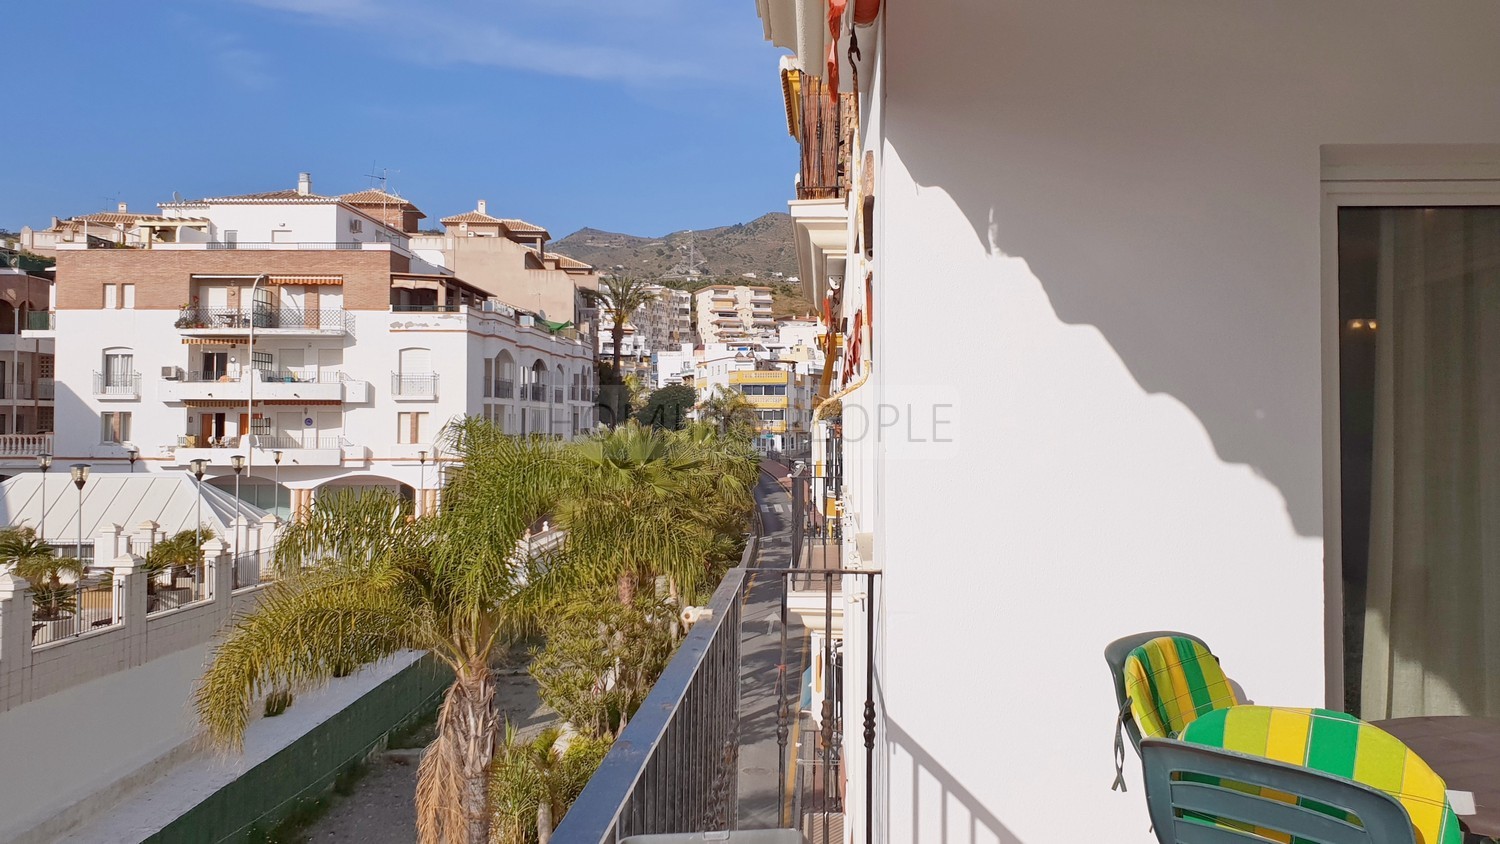 Bright and good quality flat: Spacious and close to the beach and shops.